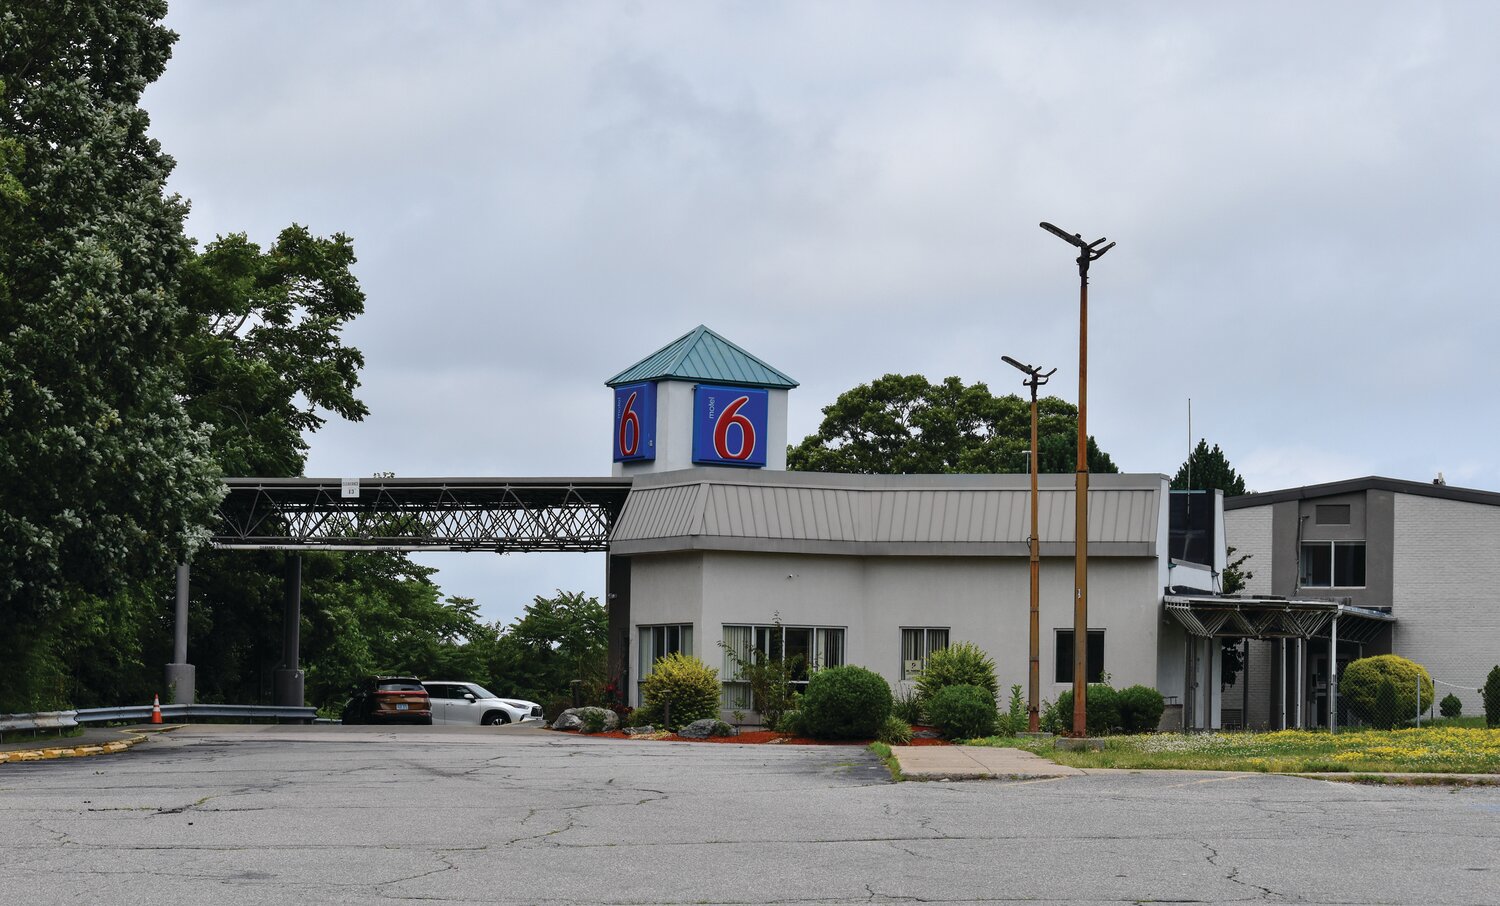 The Motel 6 in Warwick now houses more than a hundred homeless